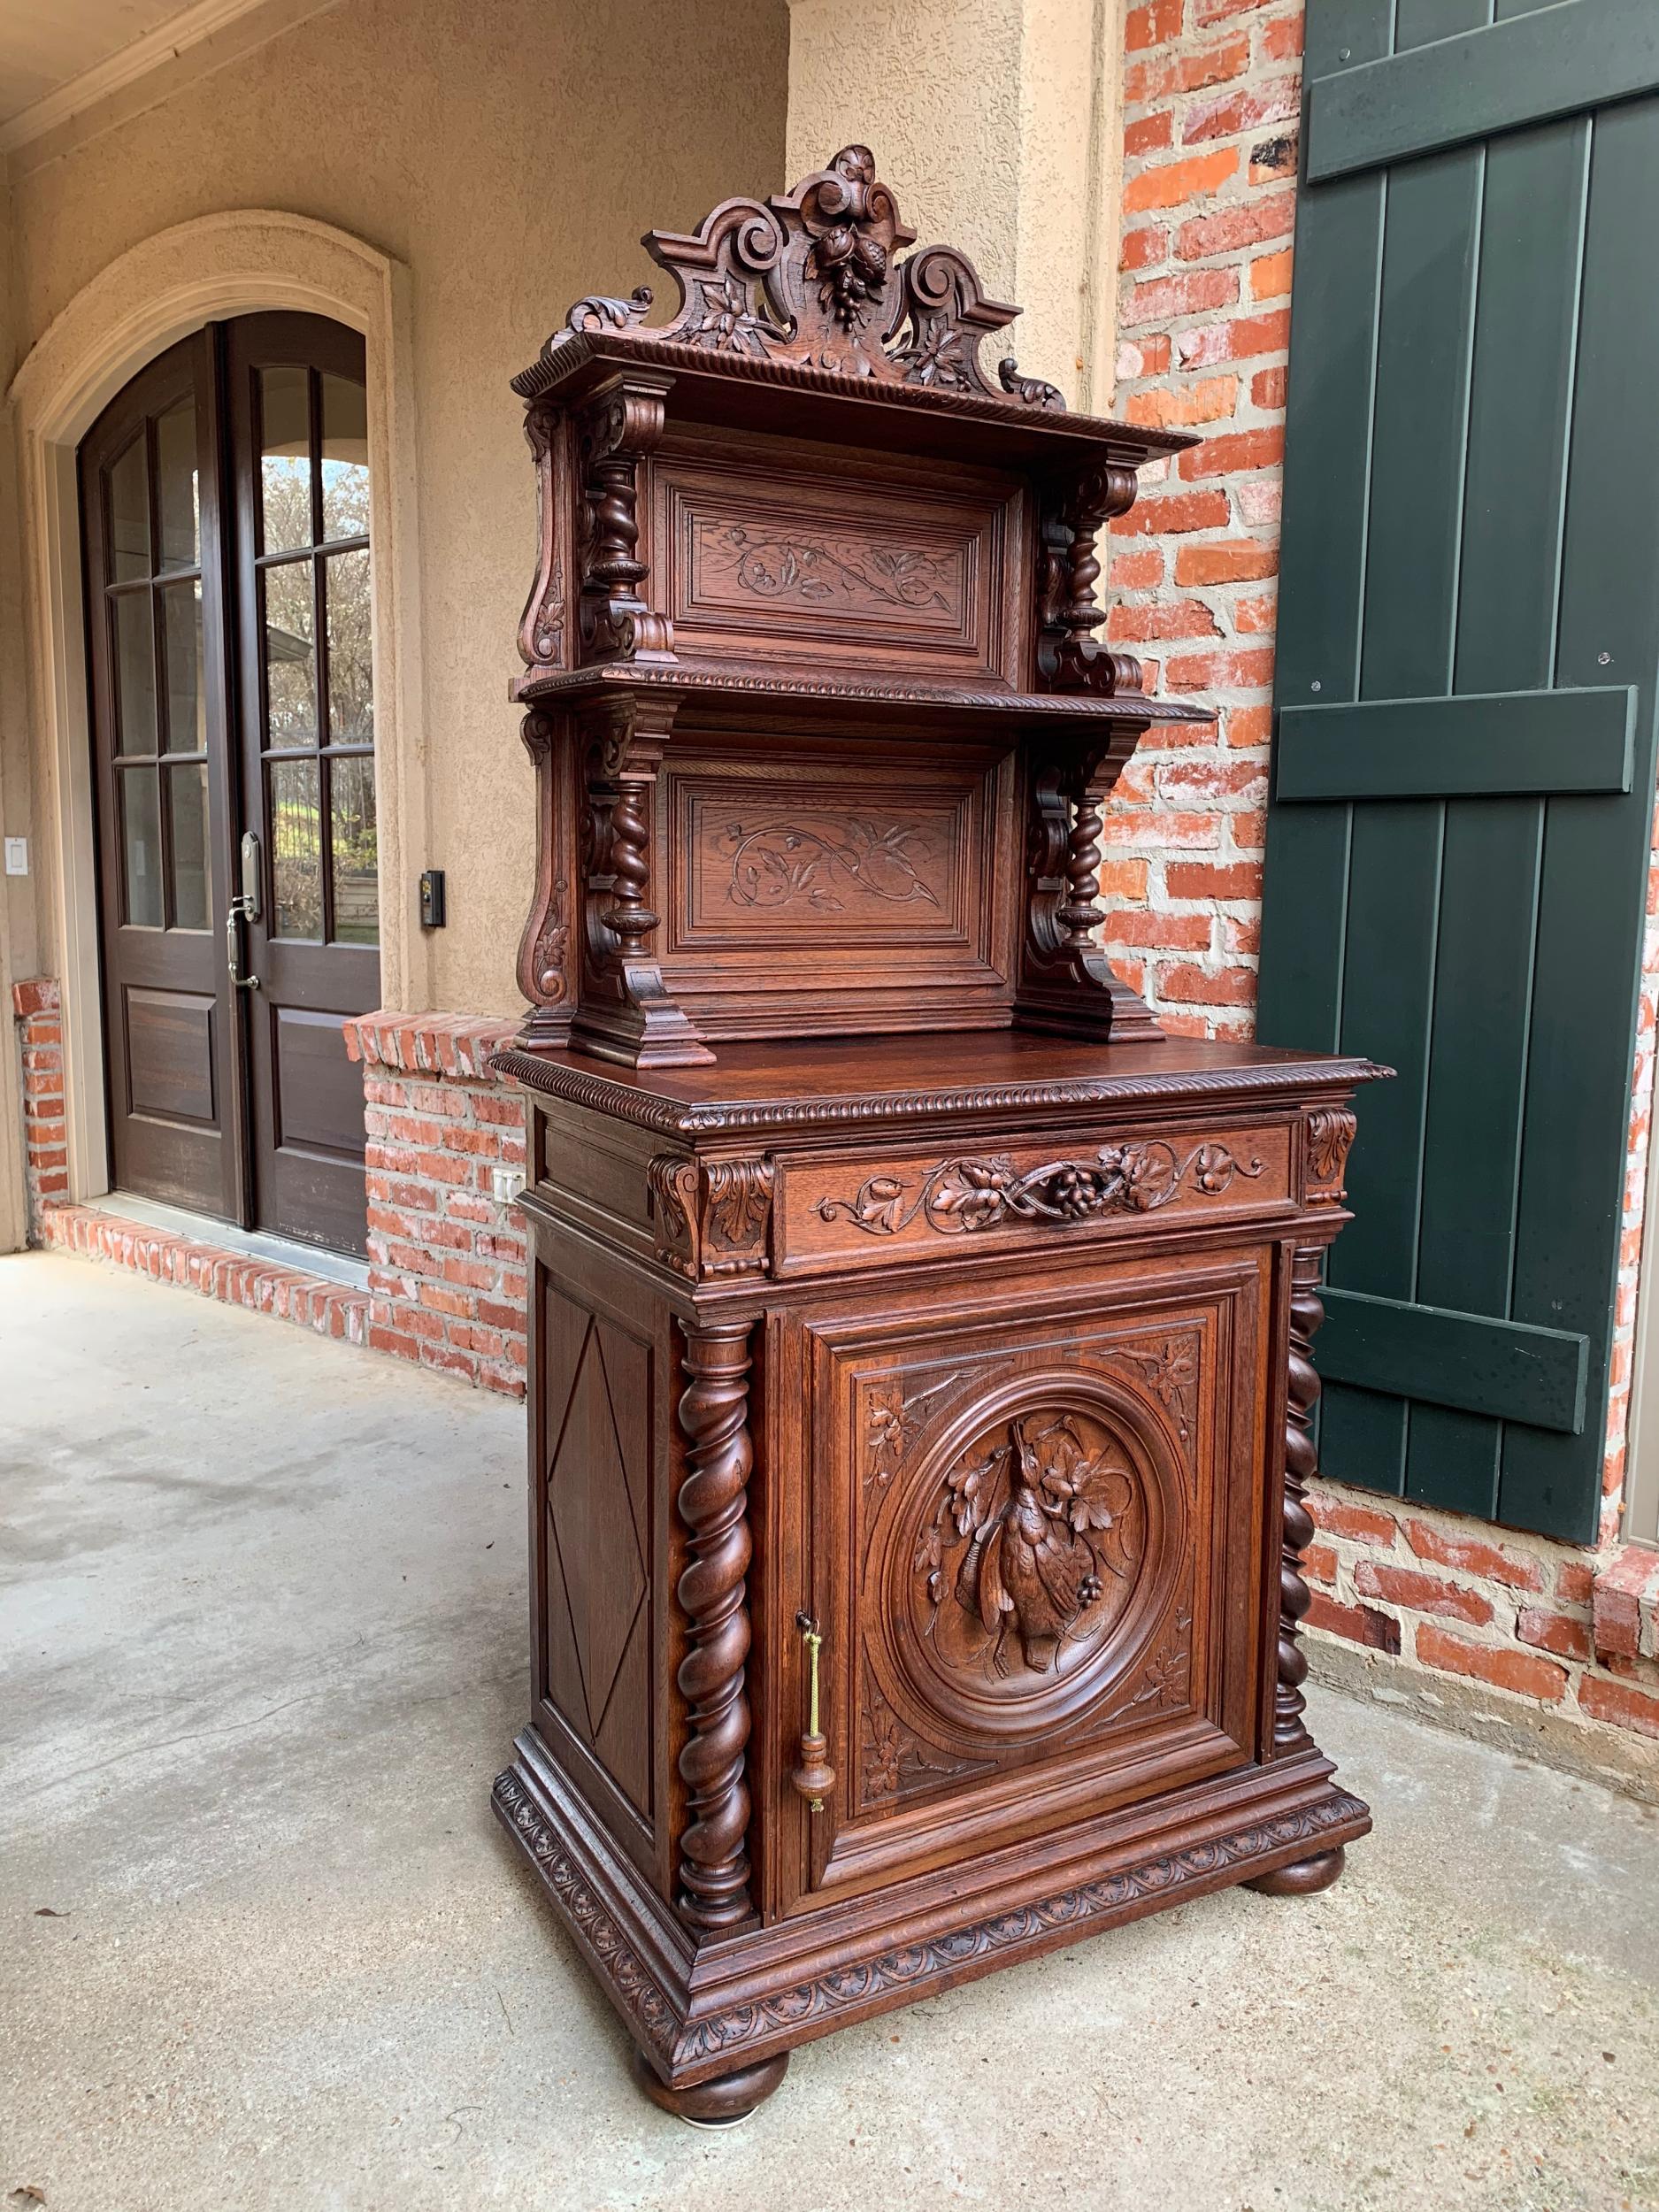 19th century French hunt cabinet bookcase Black Forest carved oak barley twist

~Direct from France~
~This stunning French ‘hunt cabinet’ or bookcase is loaded with all the features we look for in our antiques!~
~Tall and impressive, yet slender